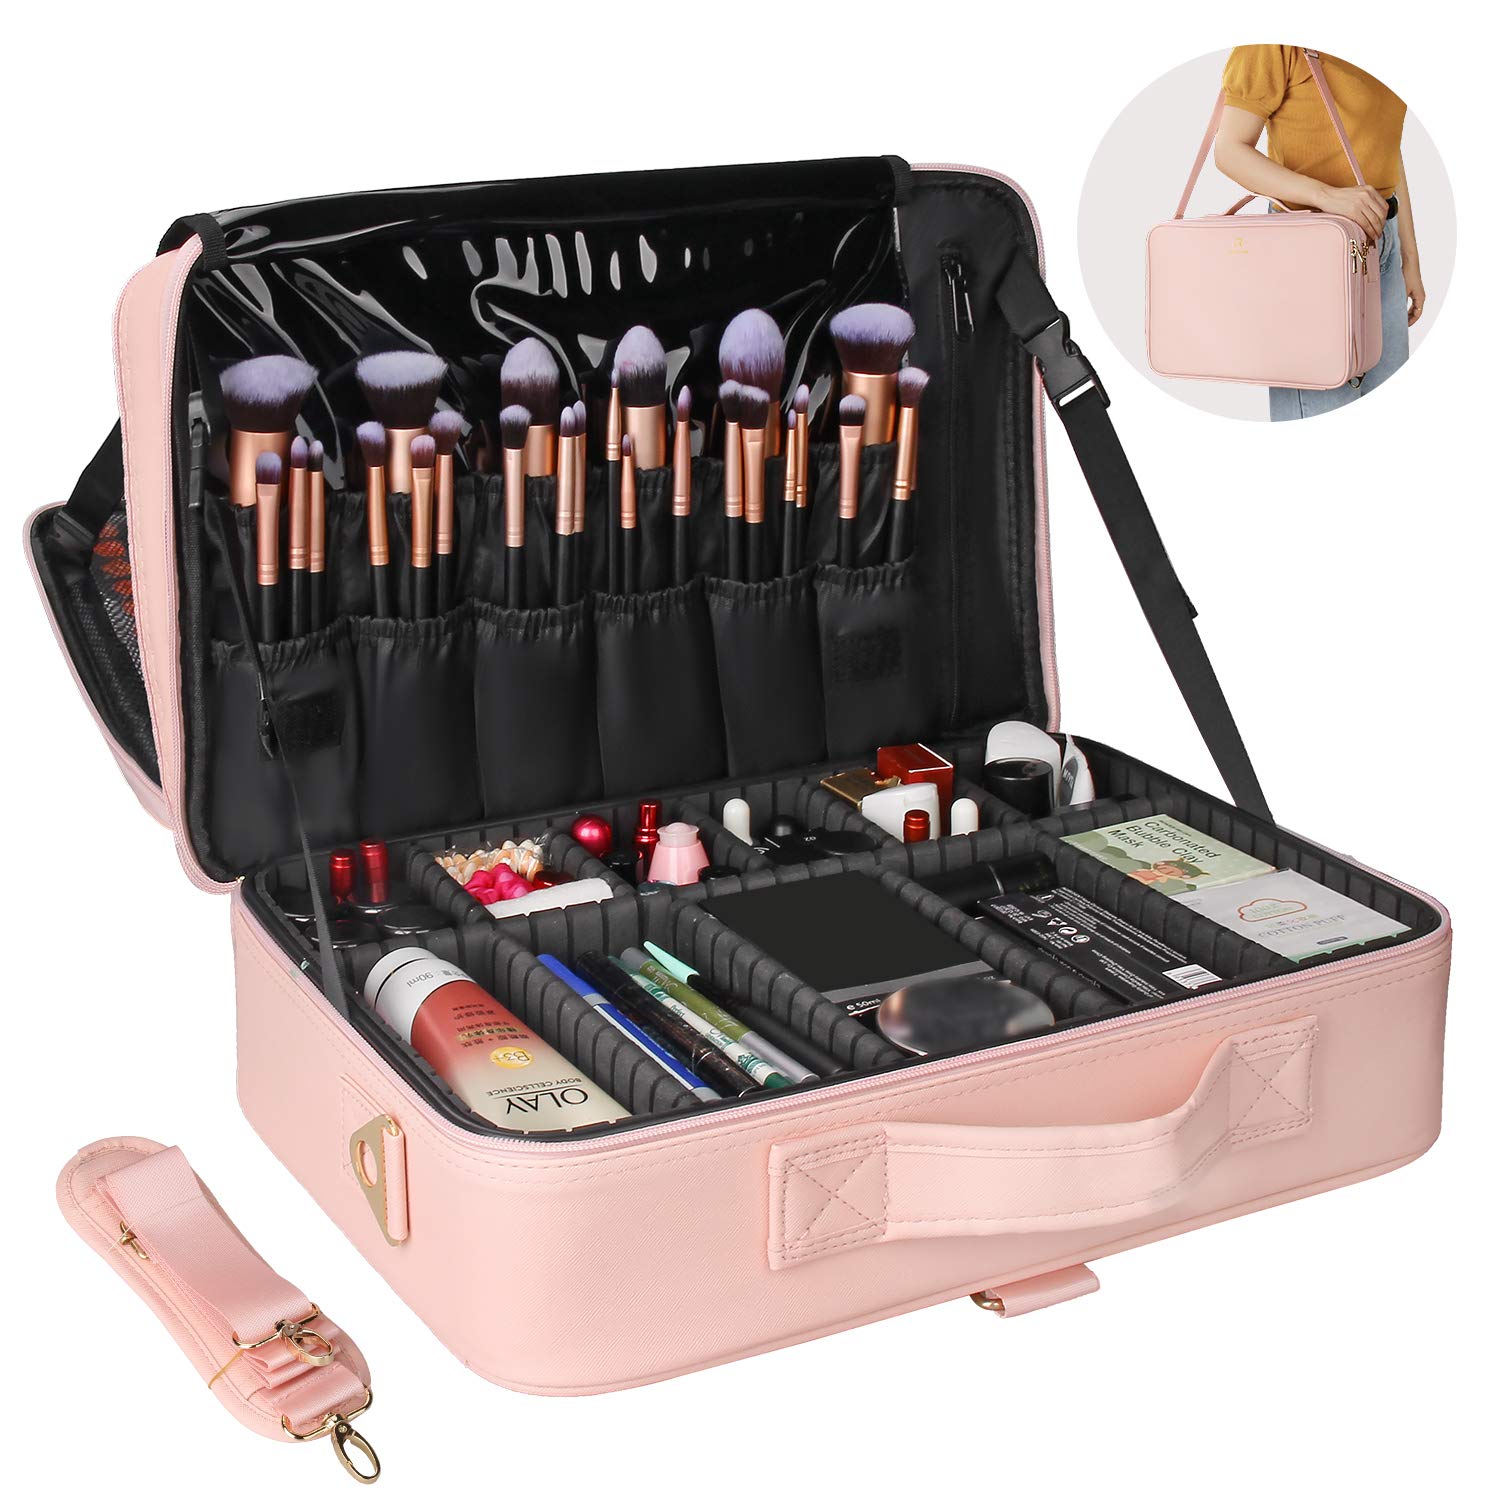 Relavel Travel Makeup Train Case Makeup Cosmetic Case Organizer Portable Artist Storage Bag with Adjustable Dividers for Cosmetics Makeup Brushes T...